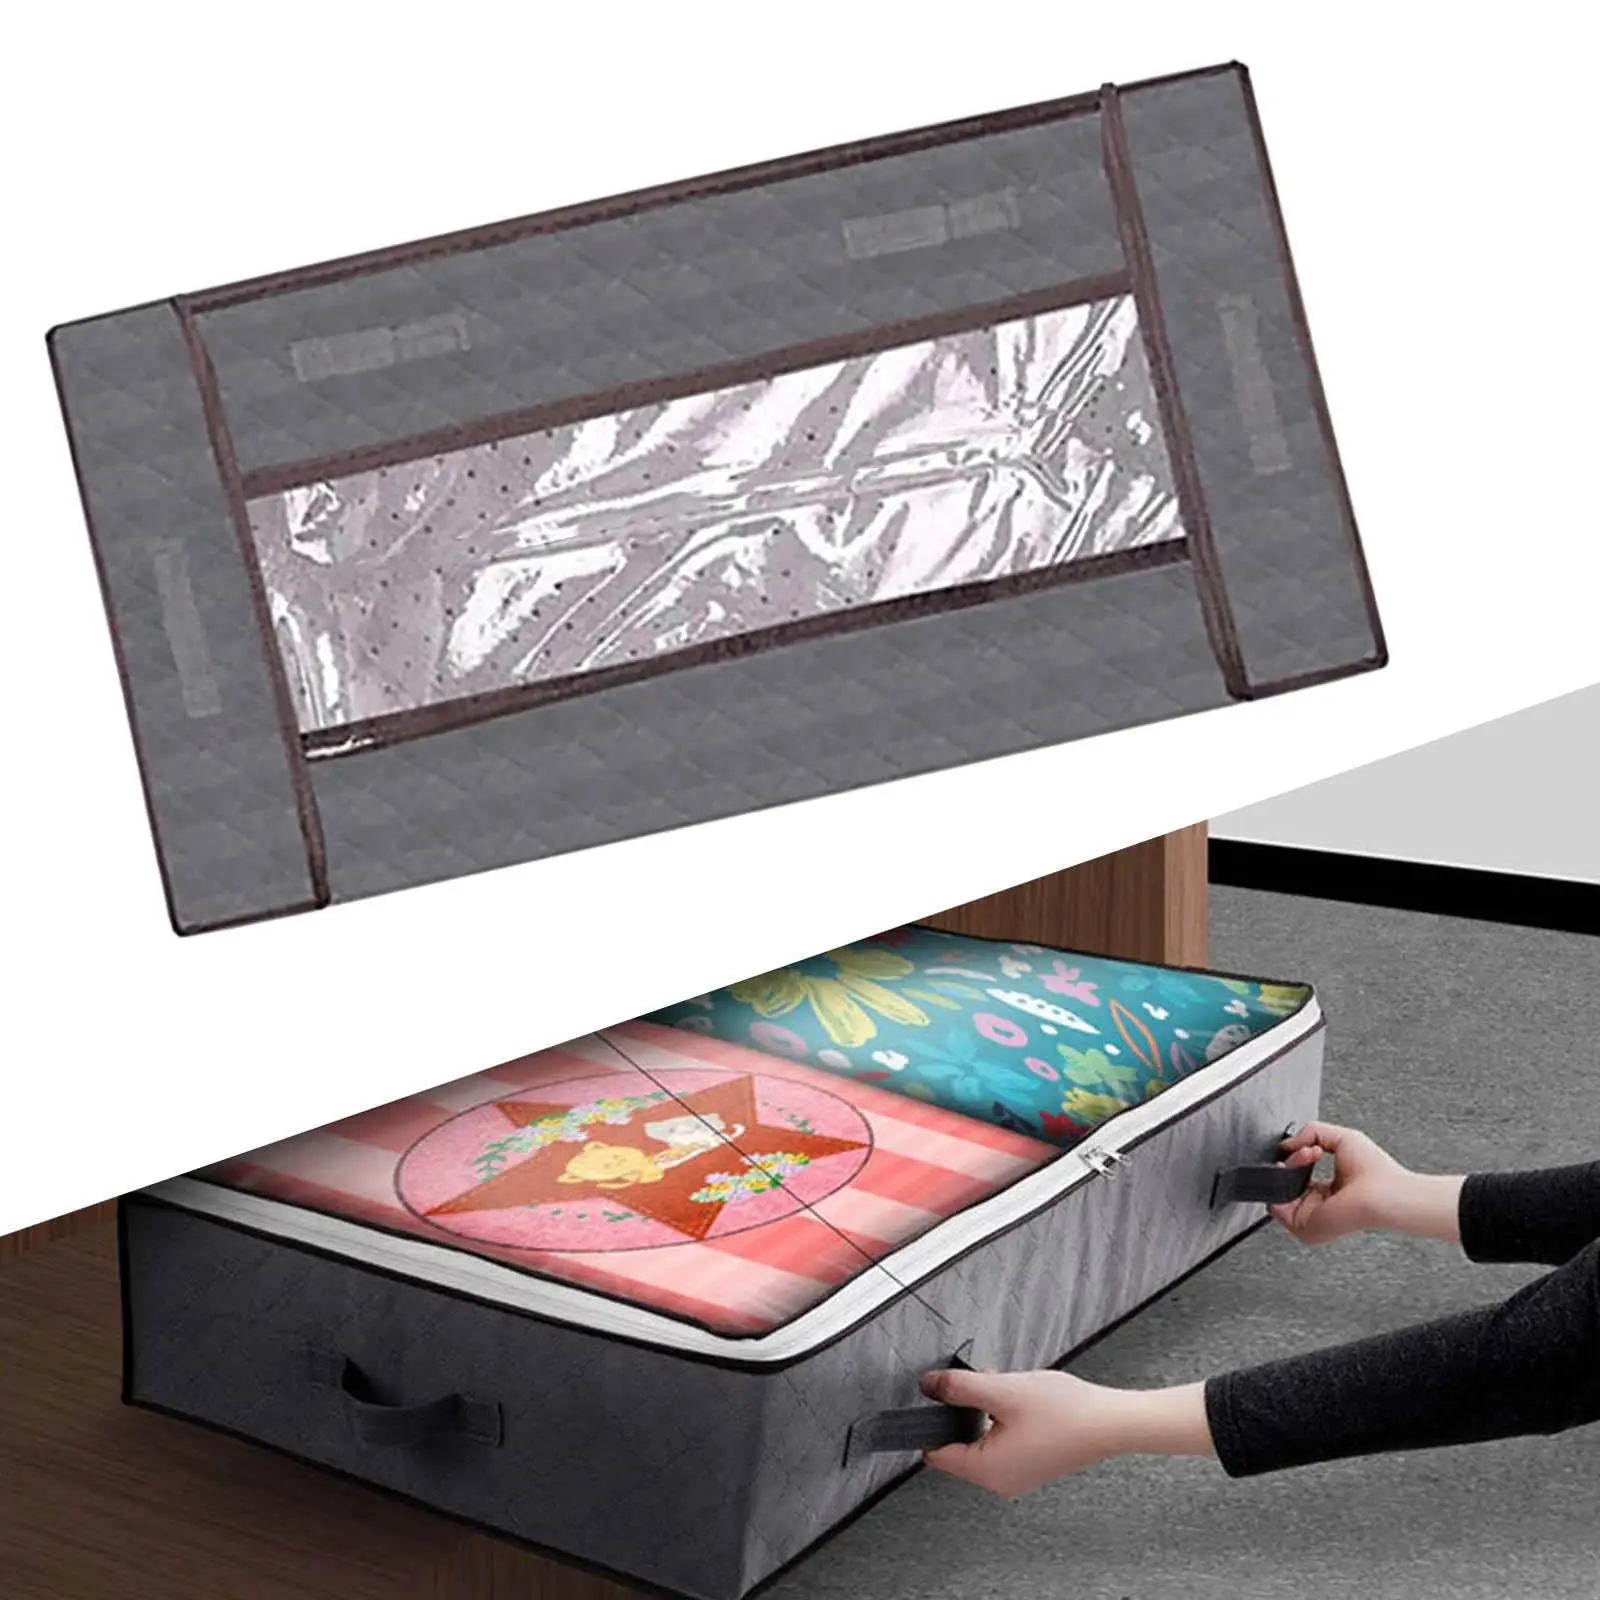 Under Bed Storage Bag Dust-Proof with Visible Windows for Closet Clothes